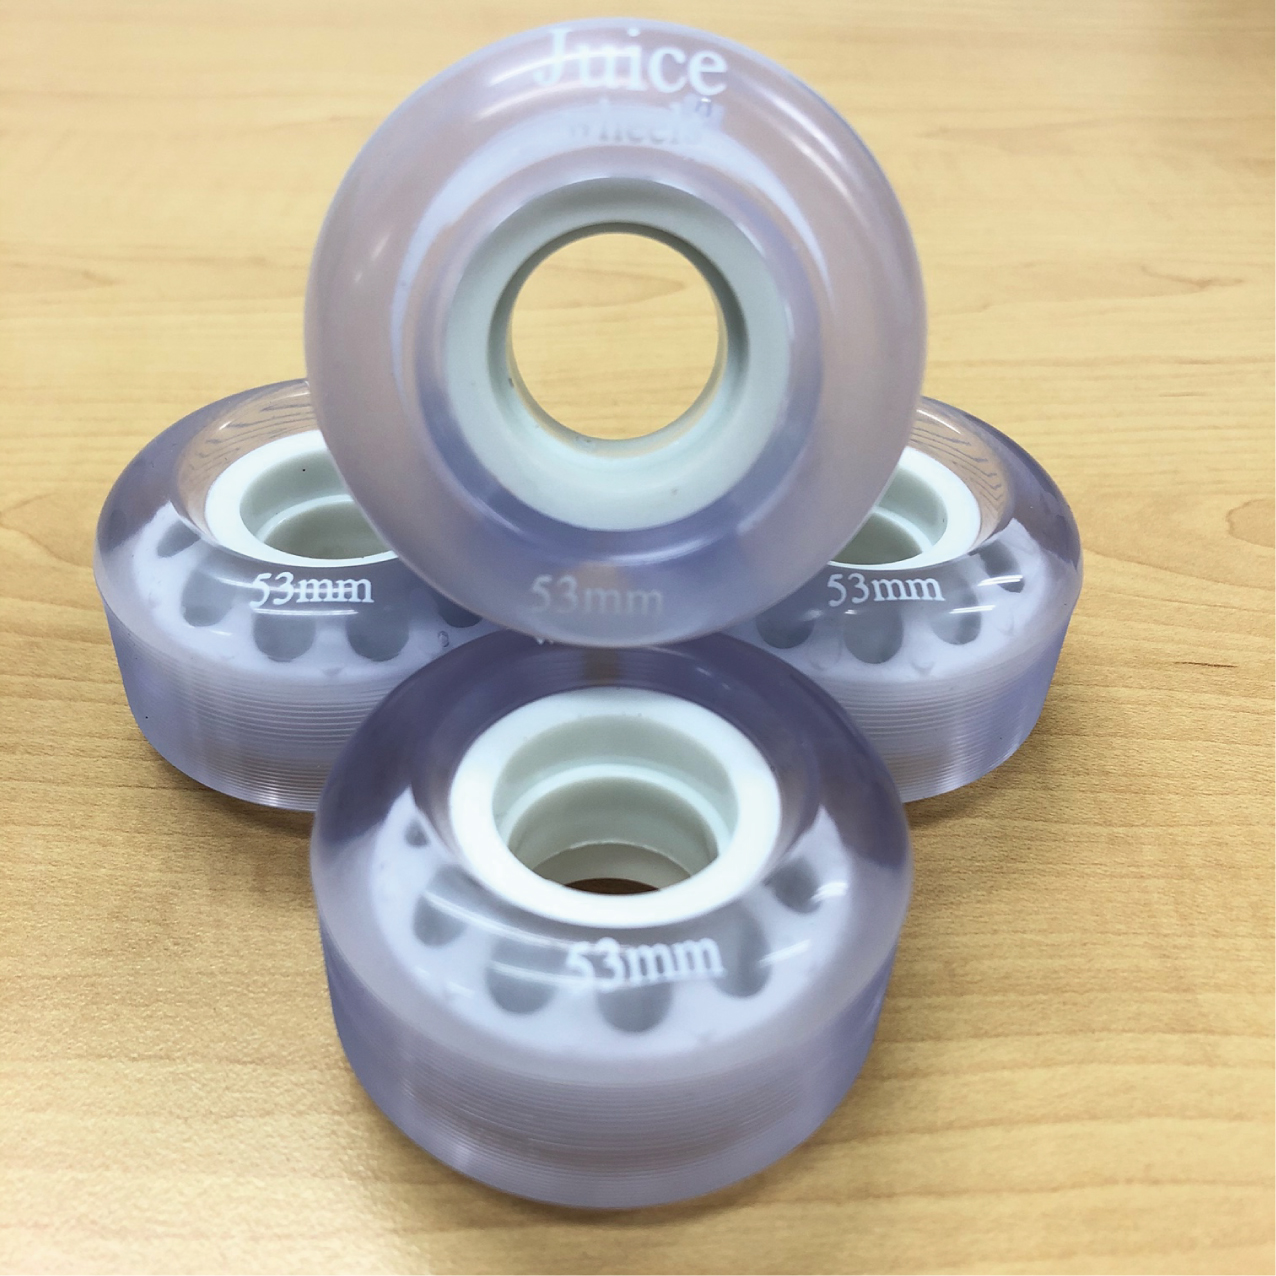 Juice ソフトウィール 53mm Clear white